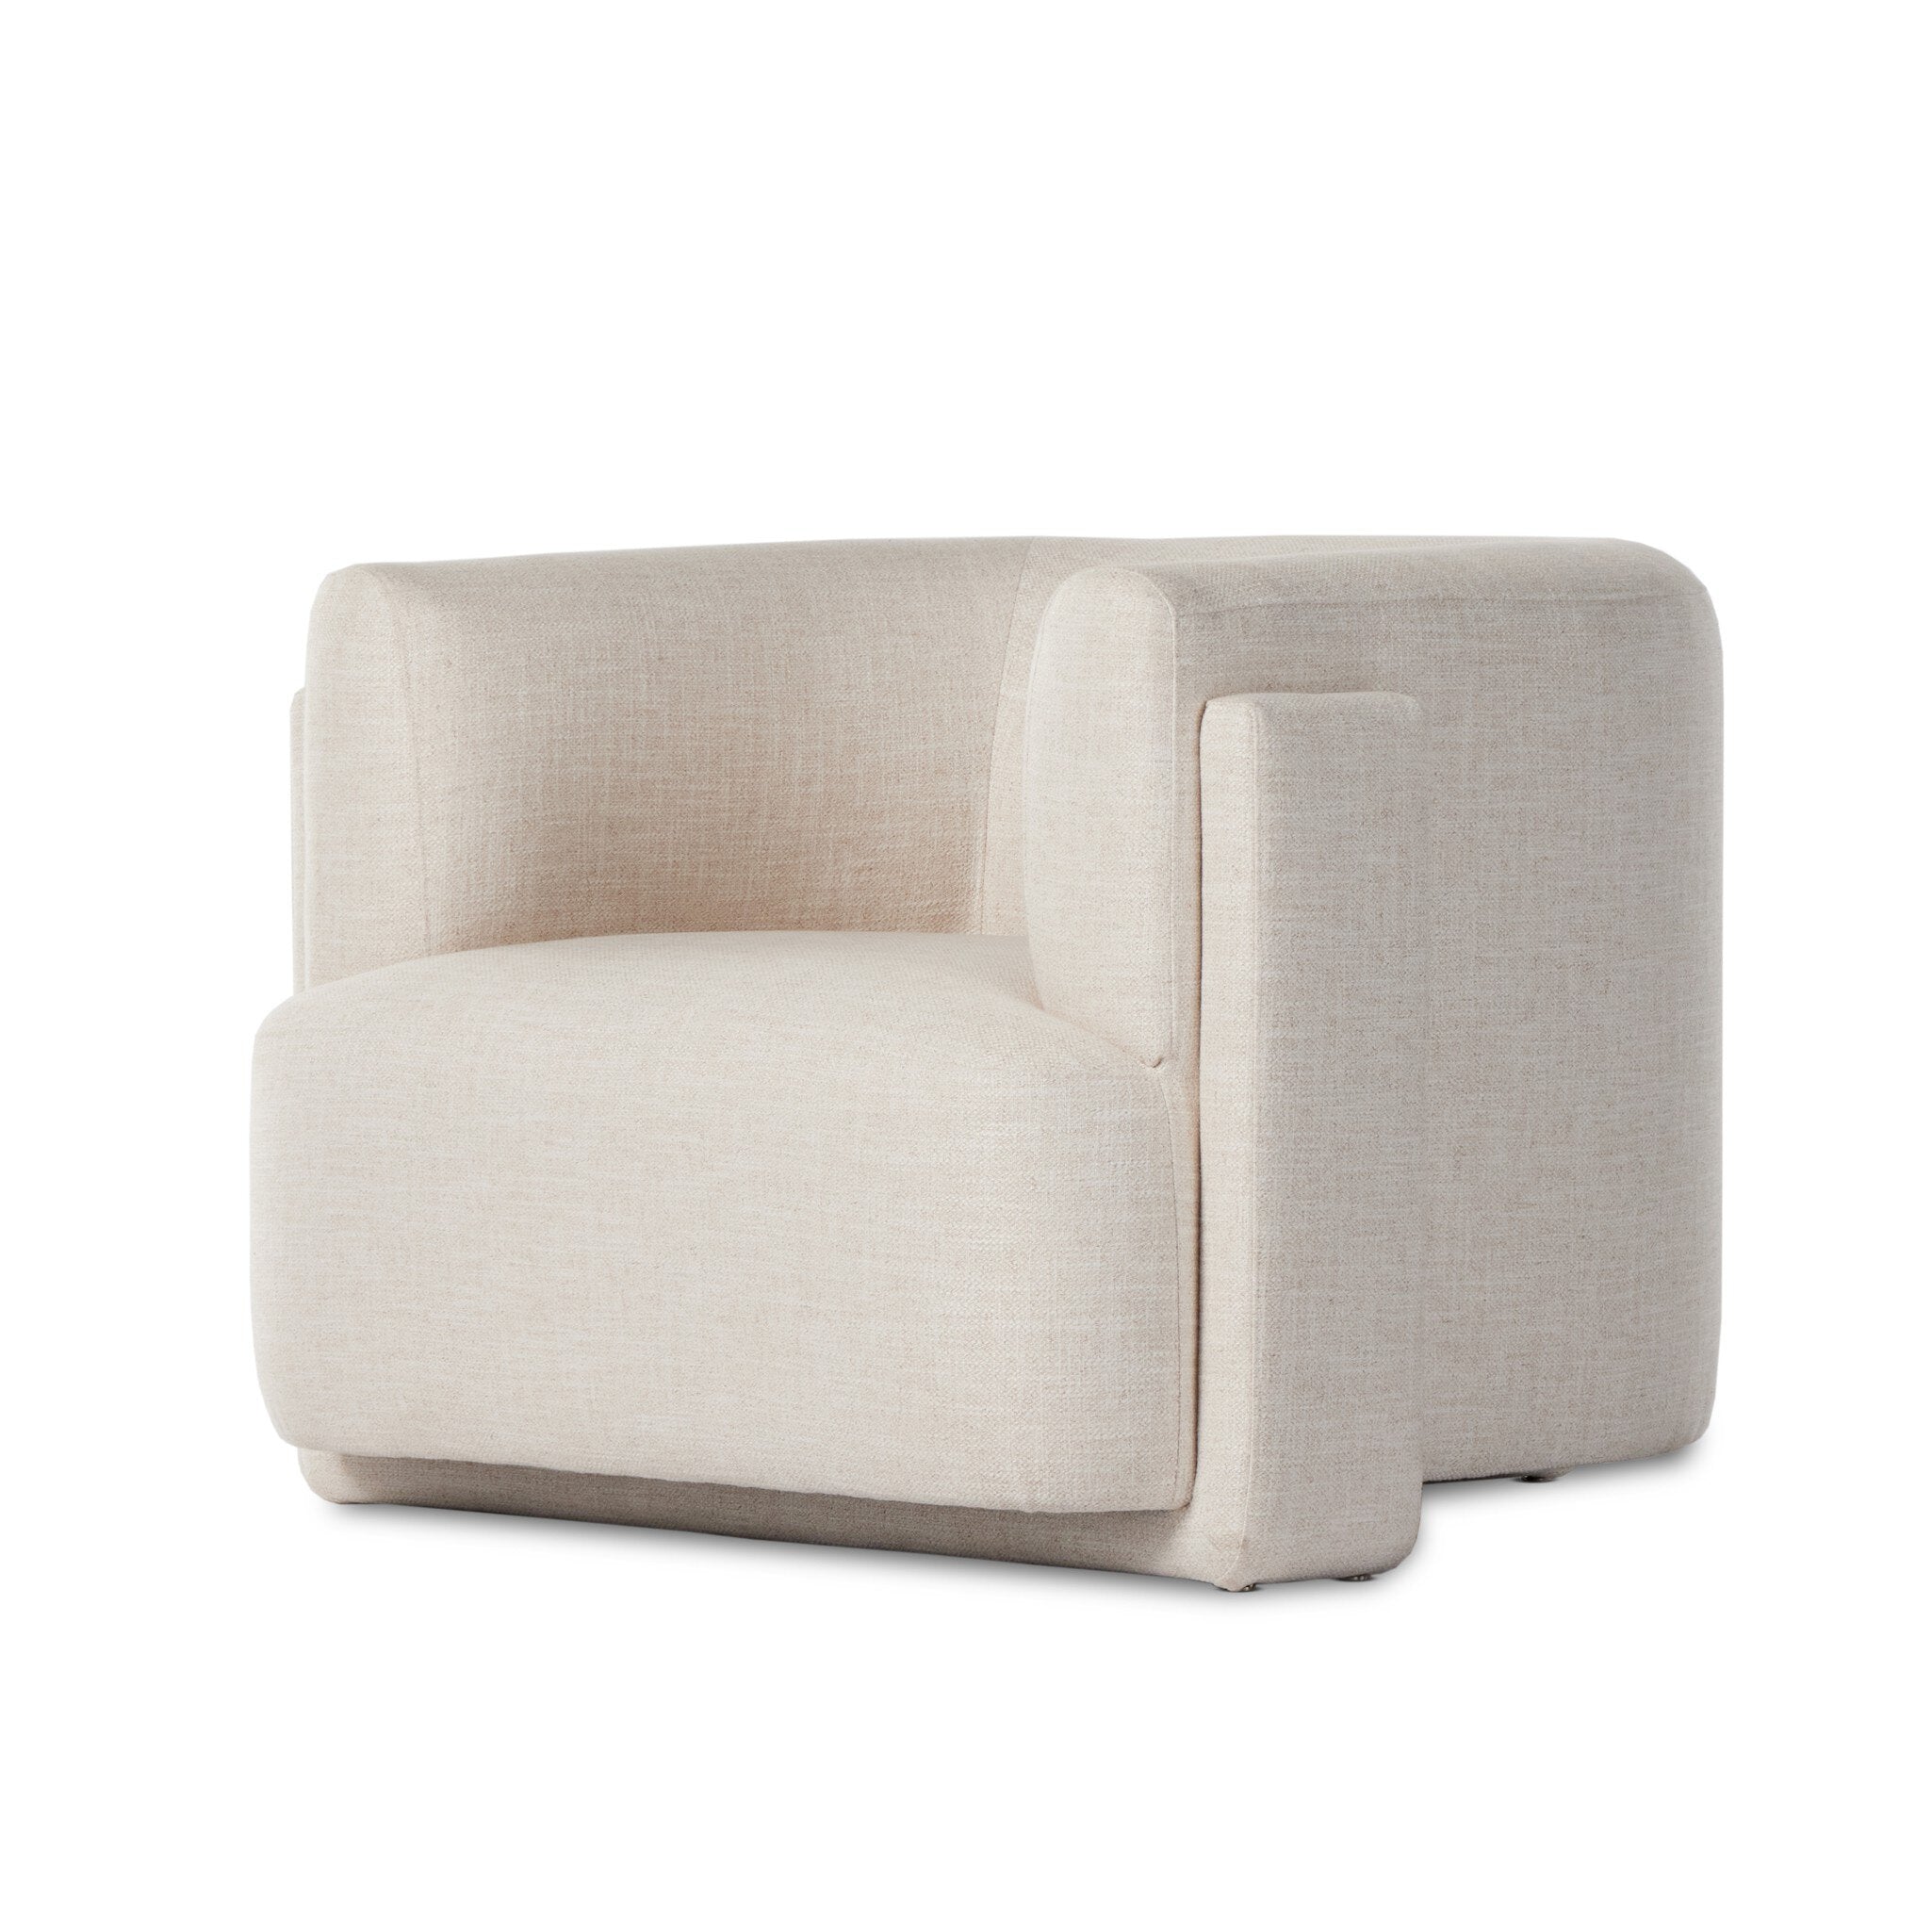 Duraflex Performance Classic Chair: Upholstered with Resilient Fabric